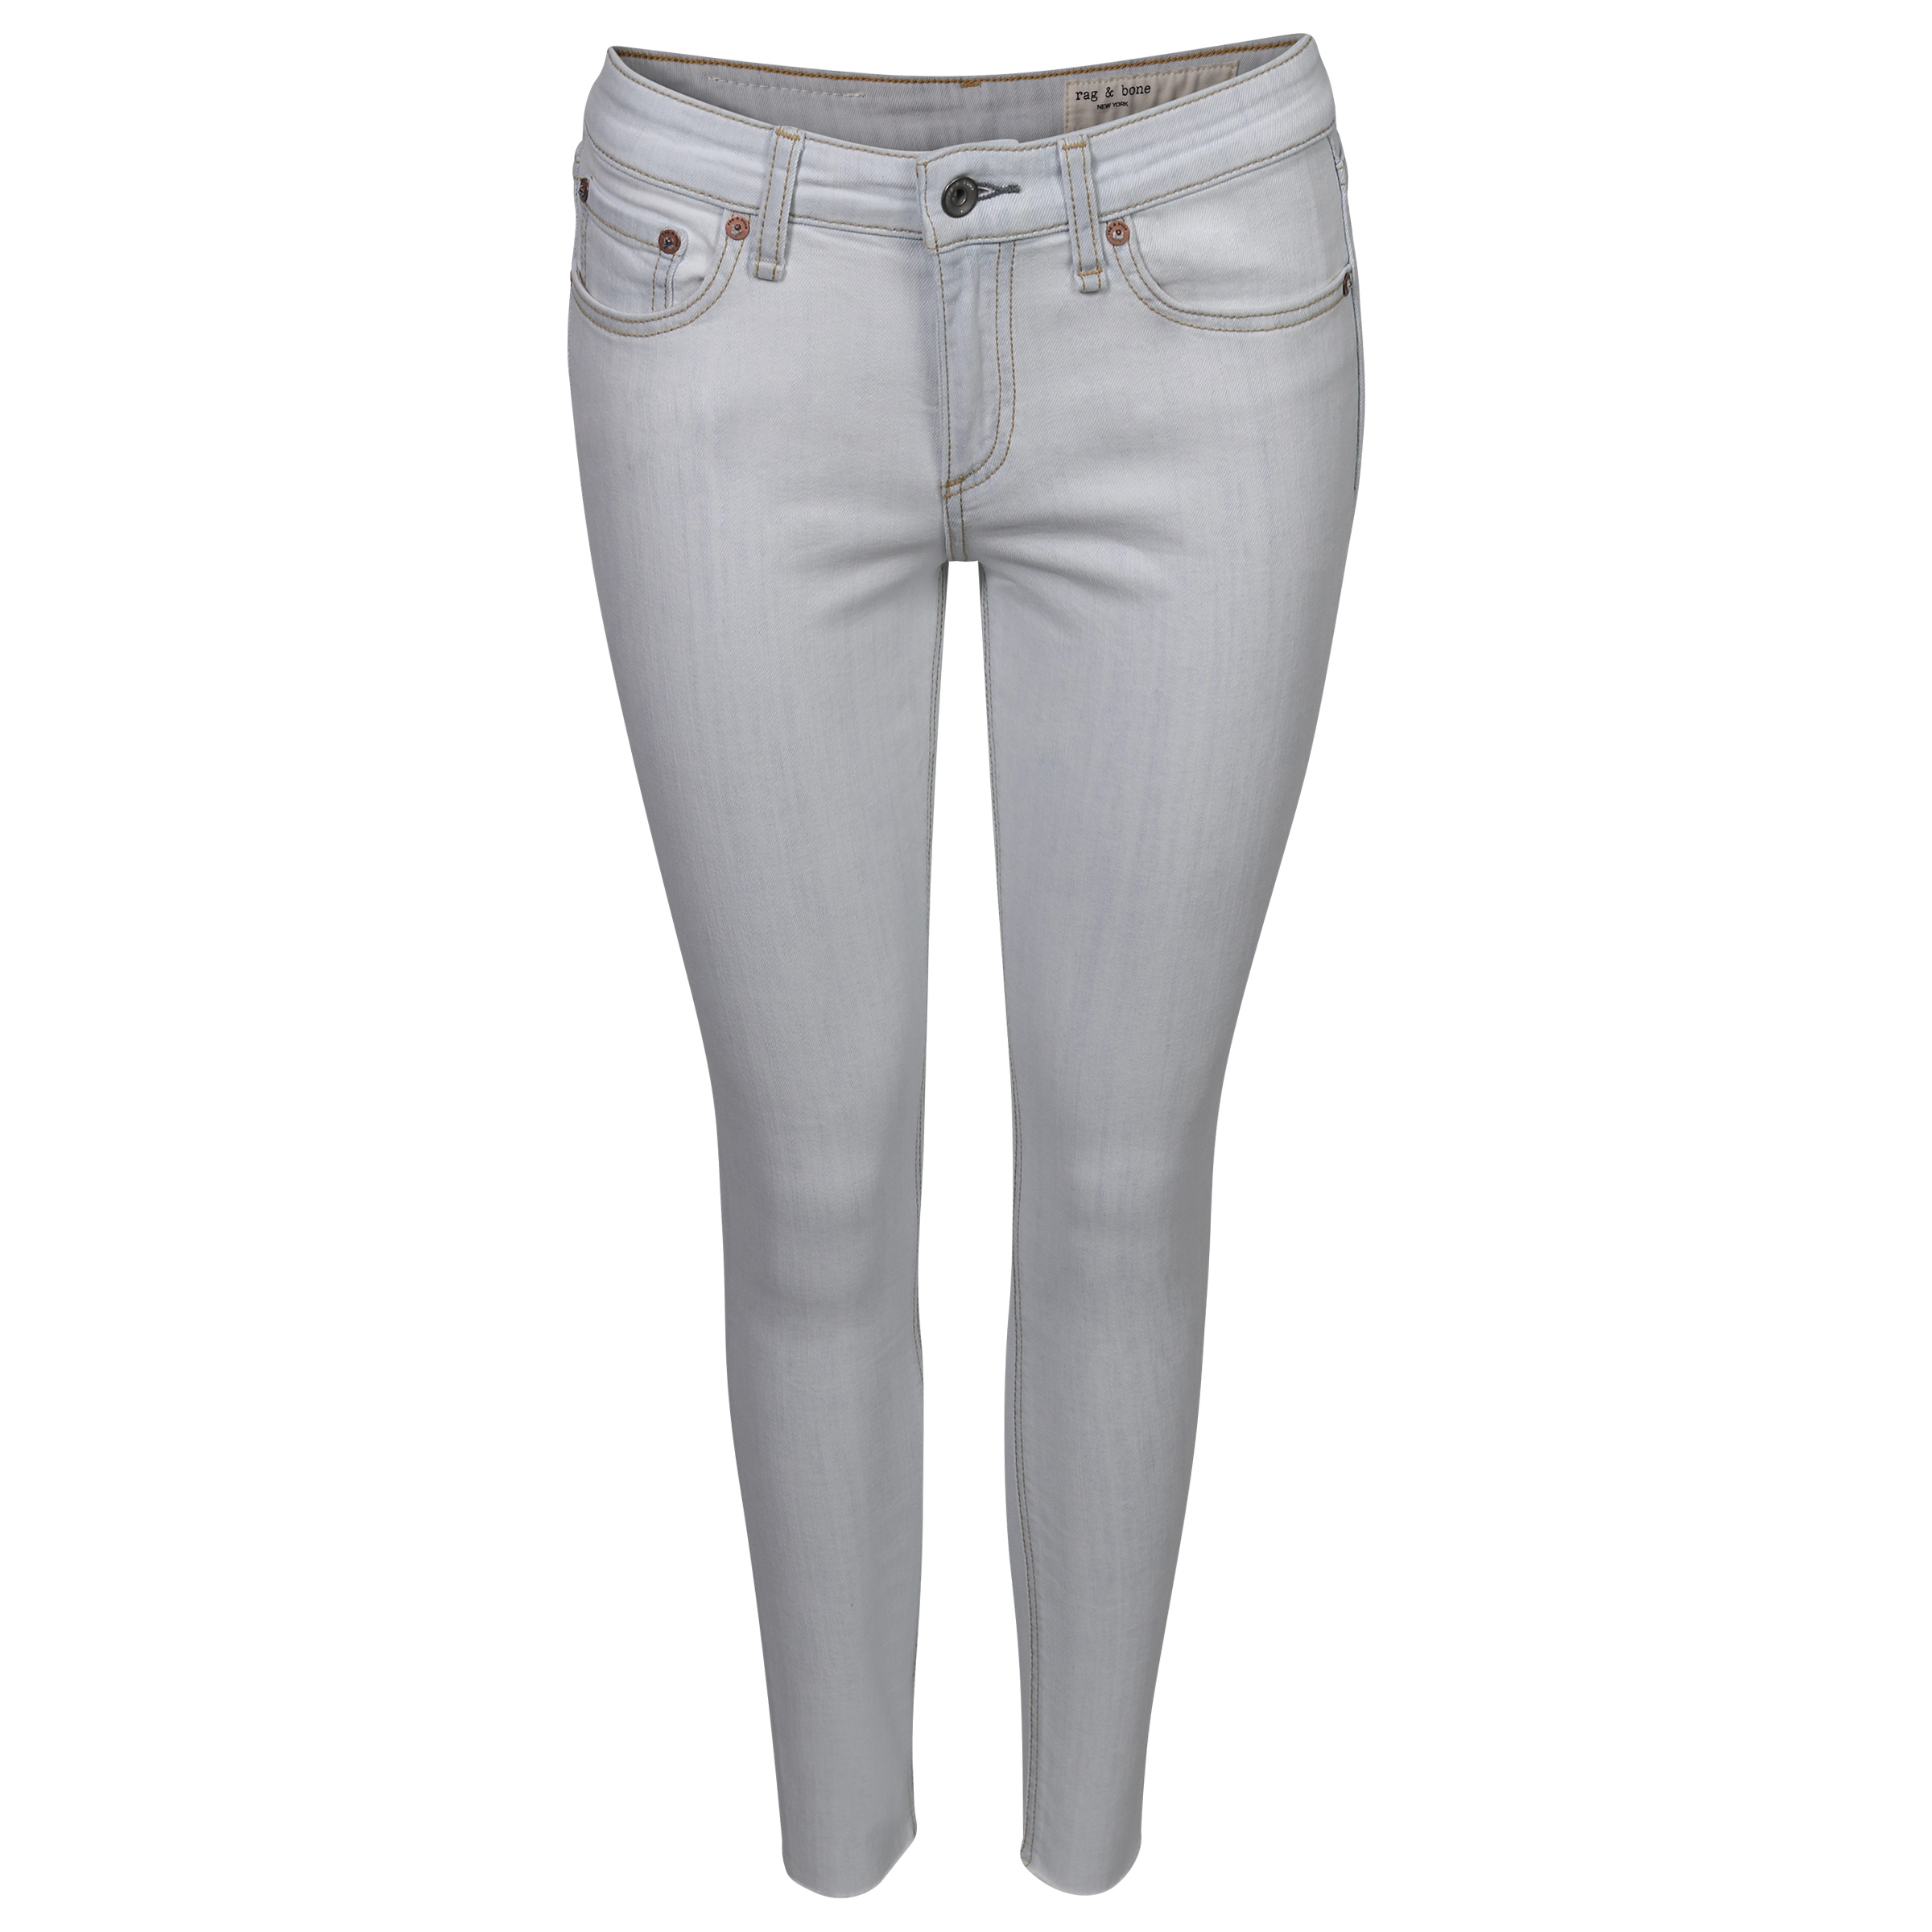 Rag & Bone Midrise Jeans Cate Ankle Skinny Ditch Plains